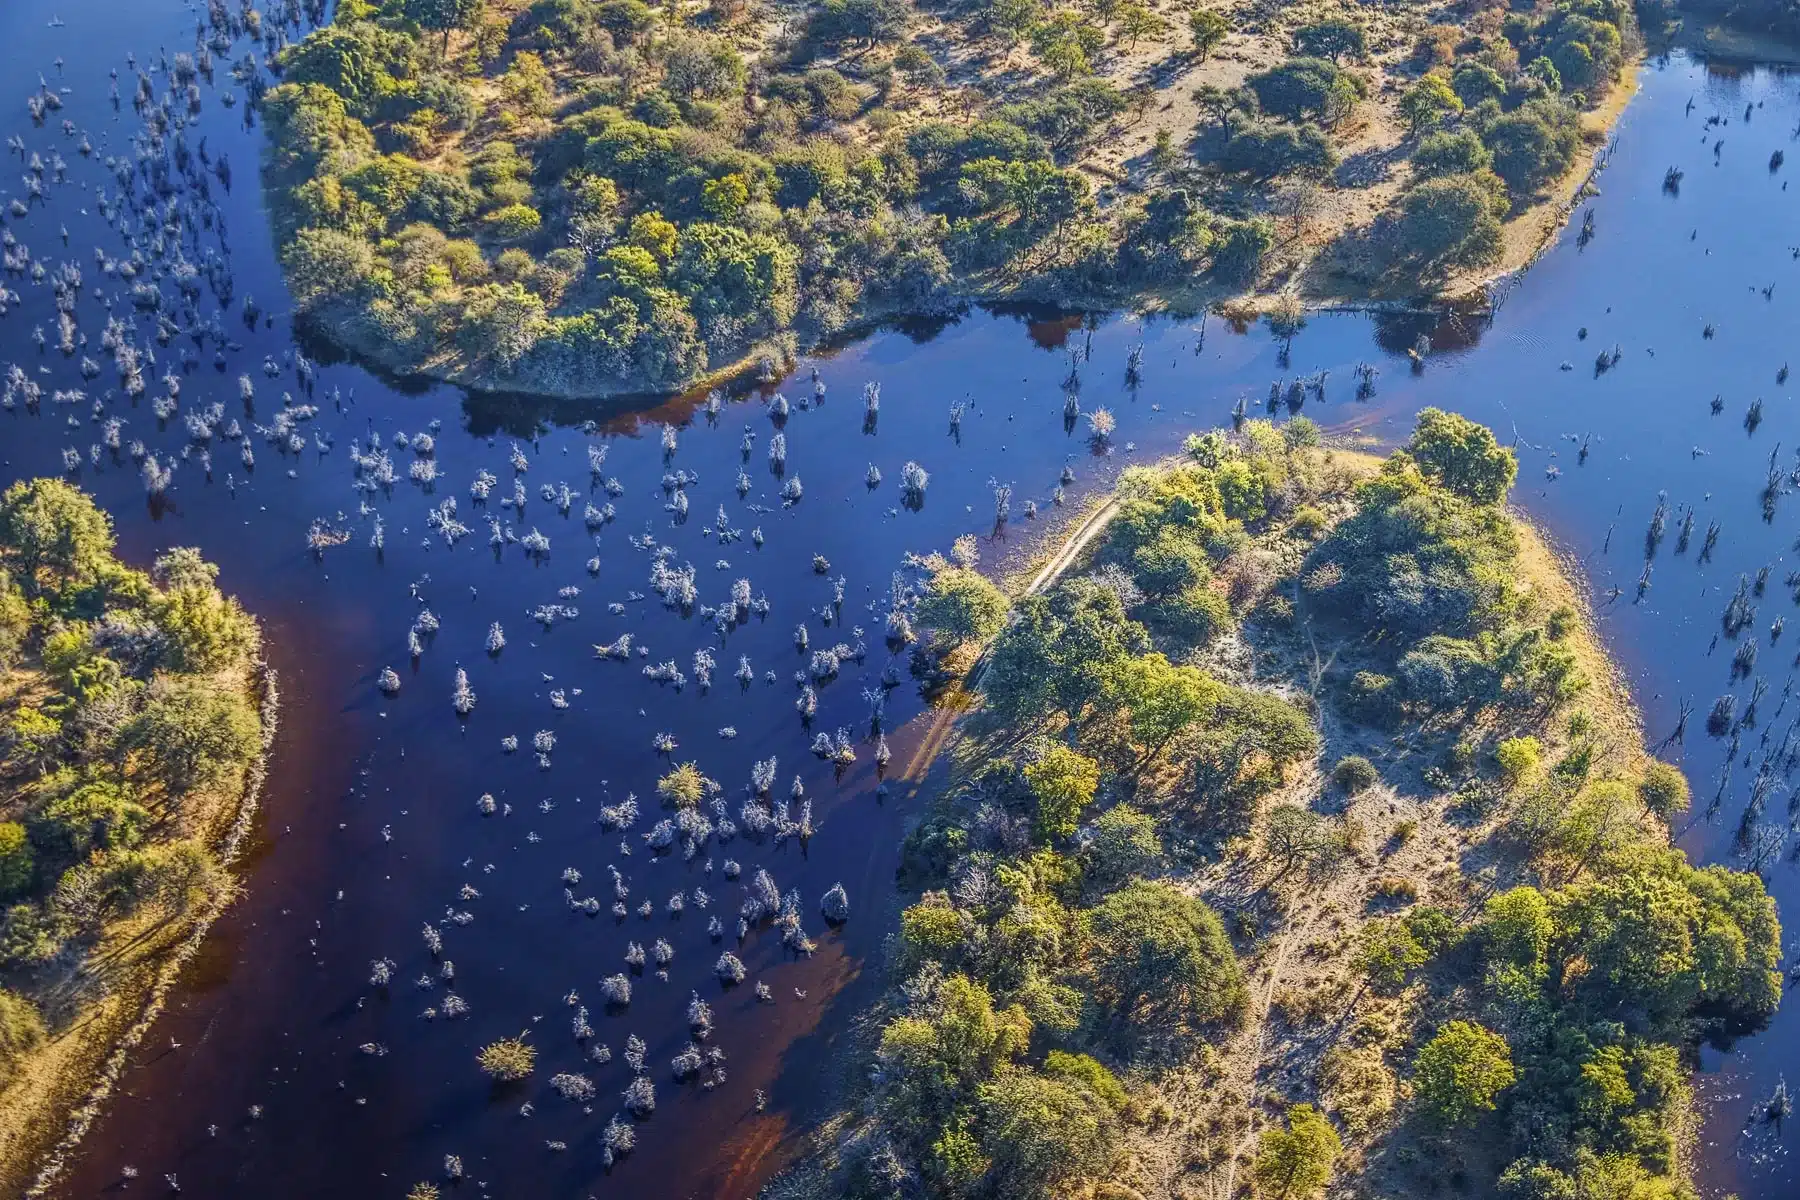 Immerse yourself in the stunning scenery of Botswana